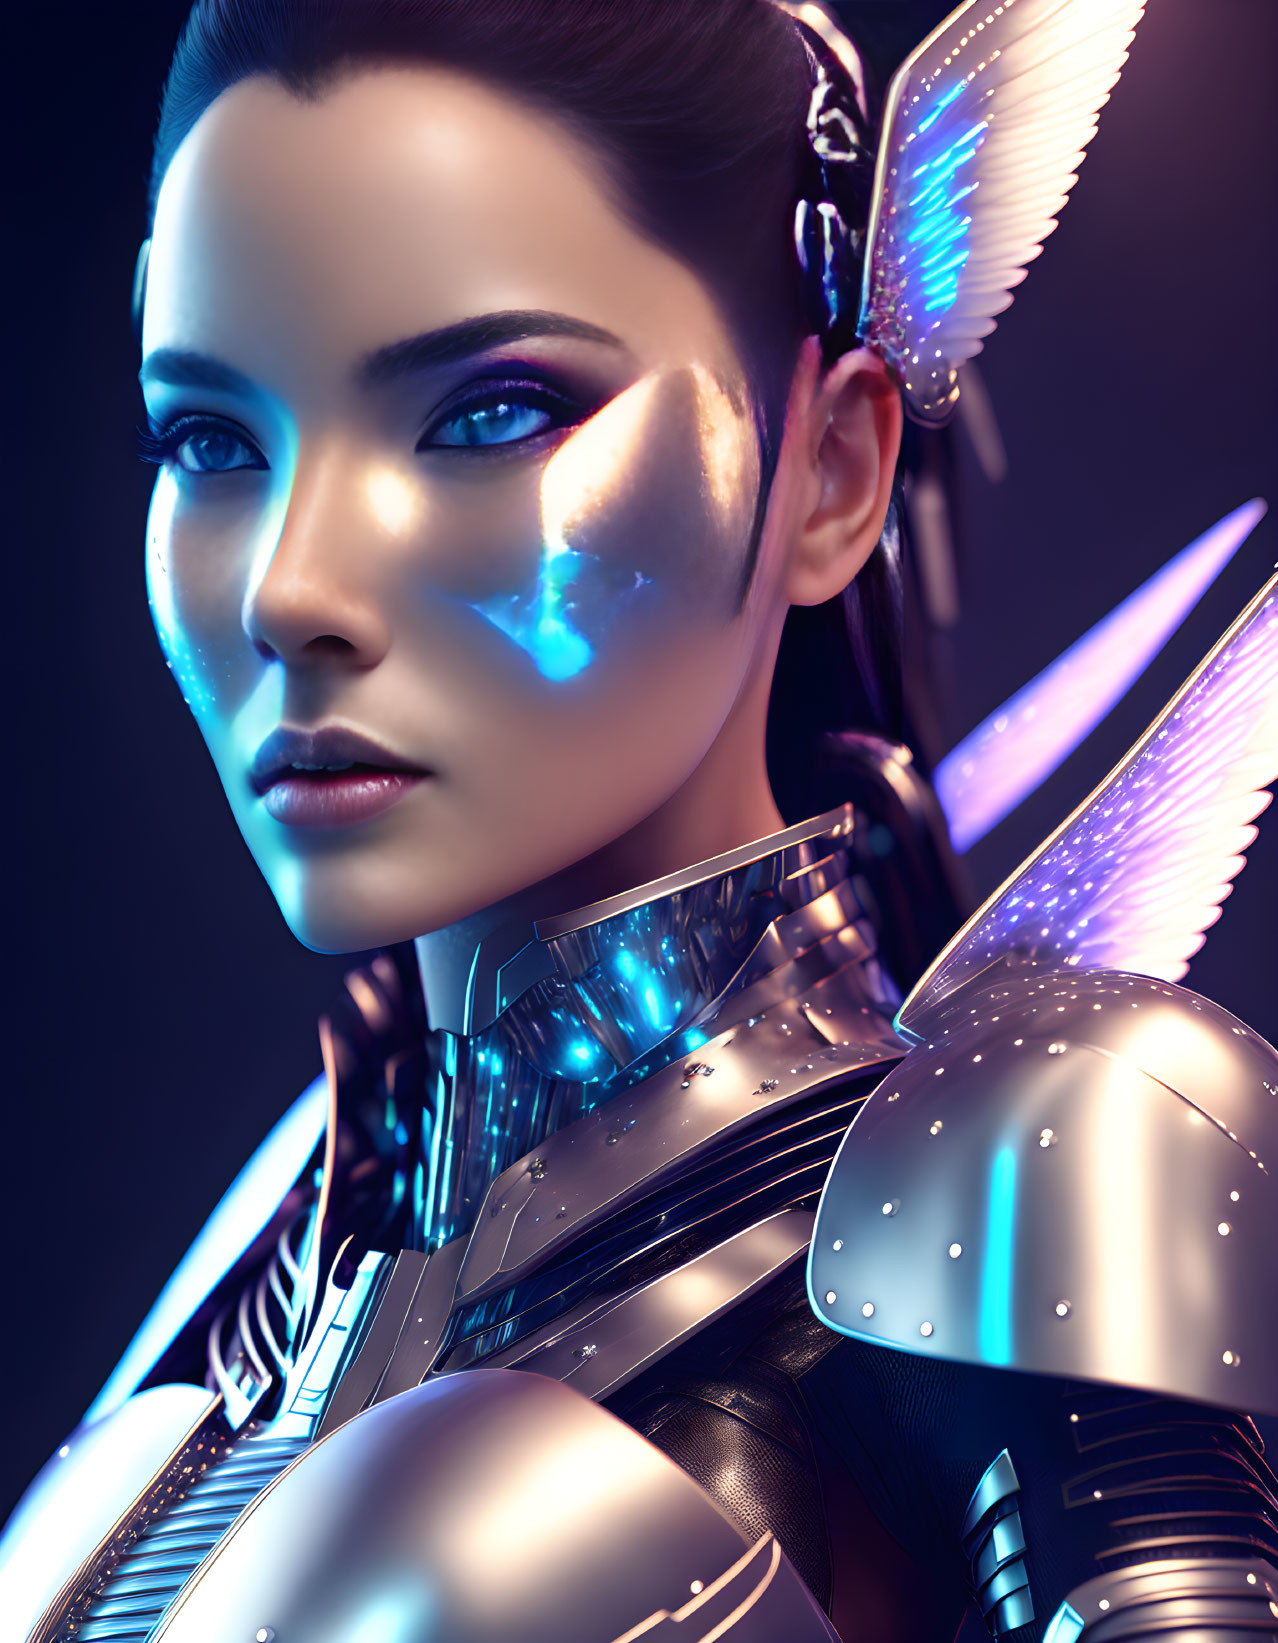 Female cyborg with glowing blue eyes and illuminated wing-like structures